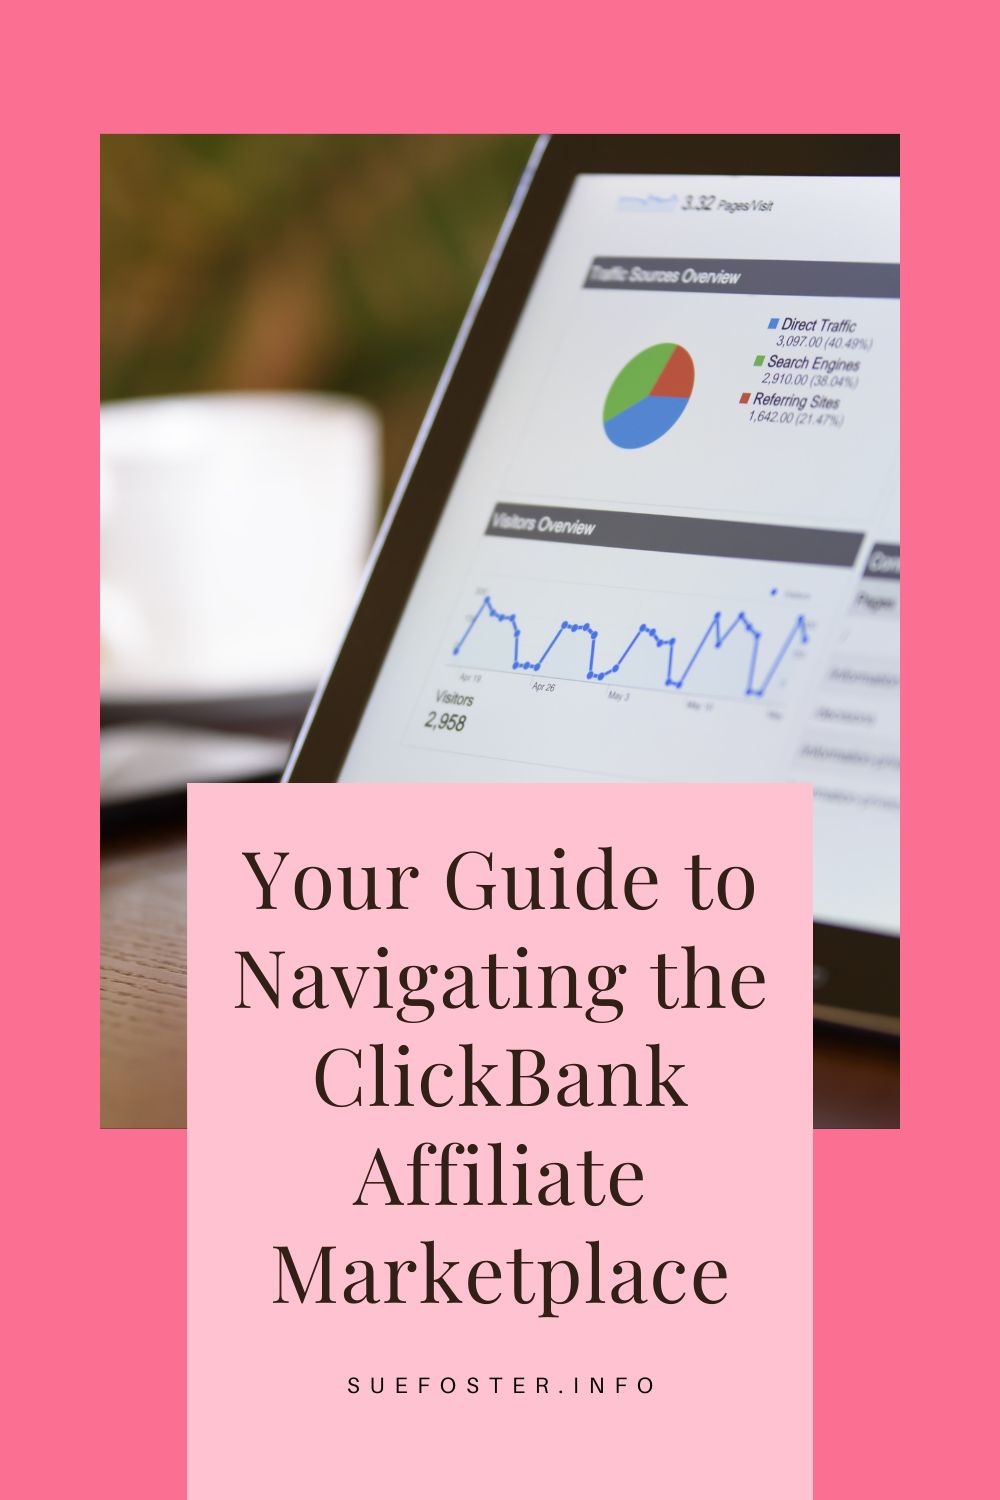 Start your ClickBank affiliate journey. From setting up an account to choosing the right products, this post walks you through each step towards successful affiliate marketing.